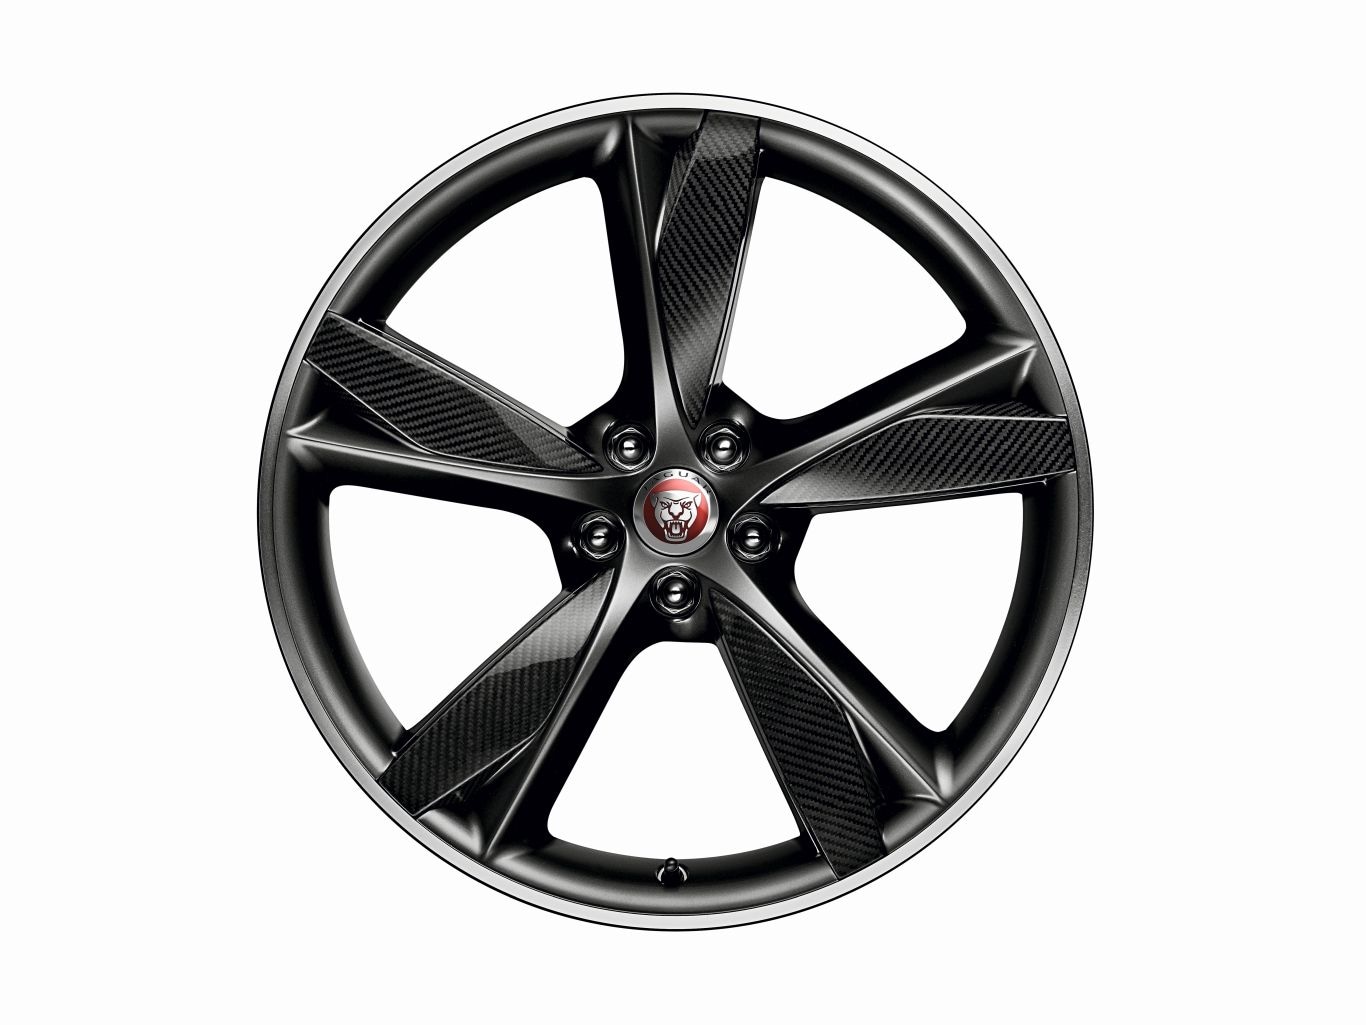 20" Forged, Style 5042, Diamond Turned with Satin Dark Grey contrast and Carbon Fibre inserts, rear image